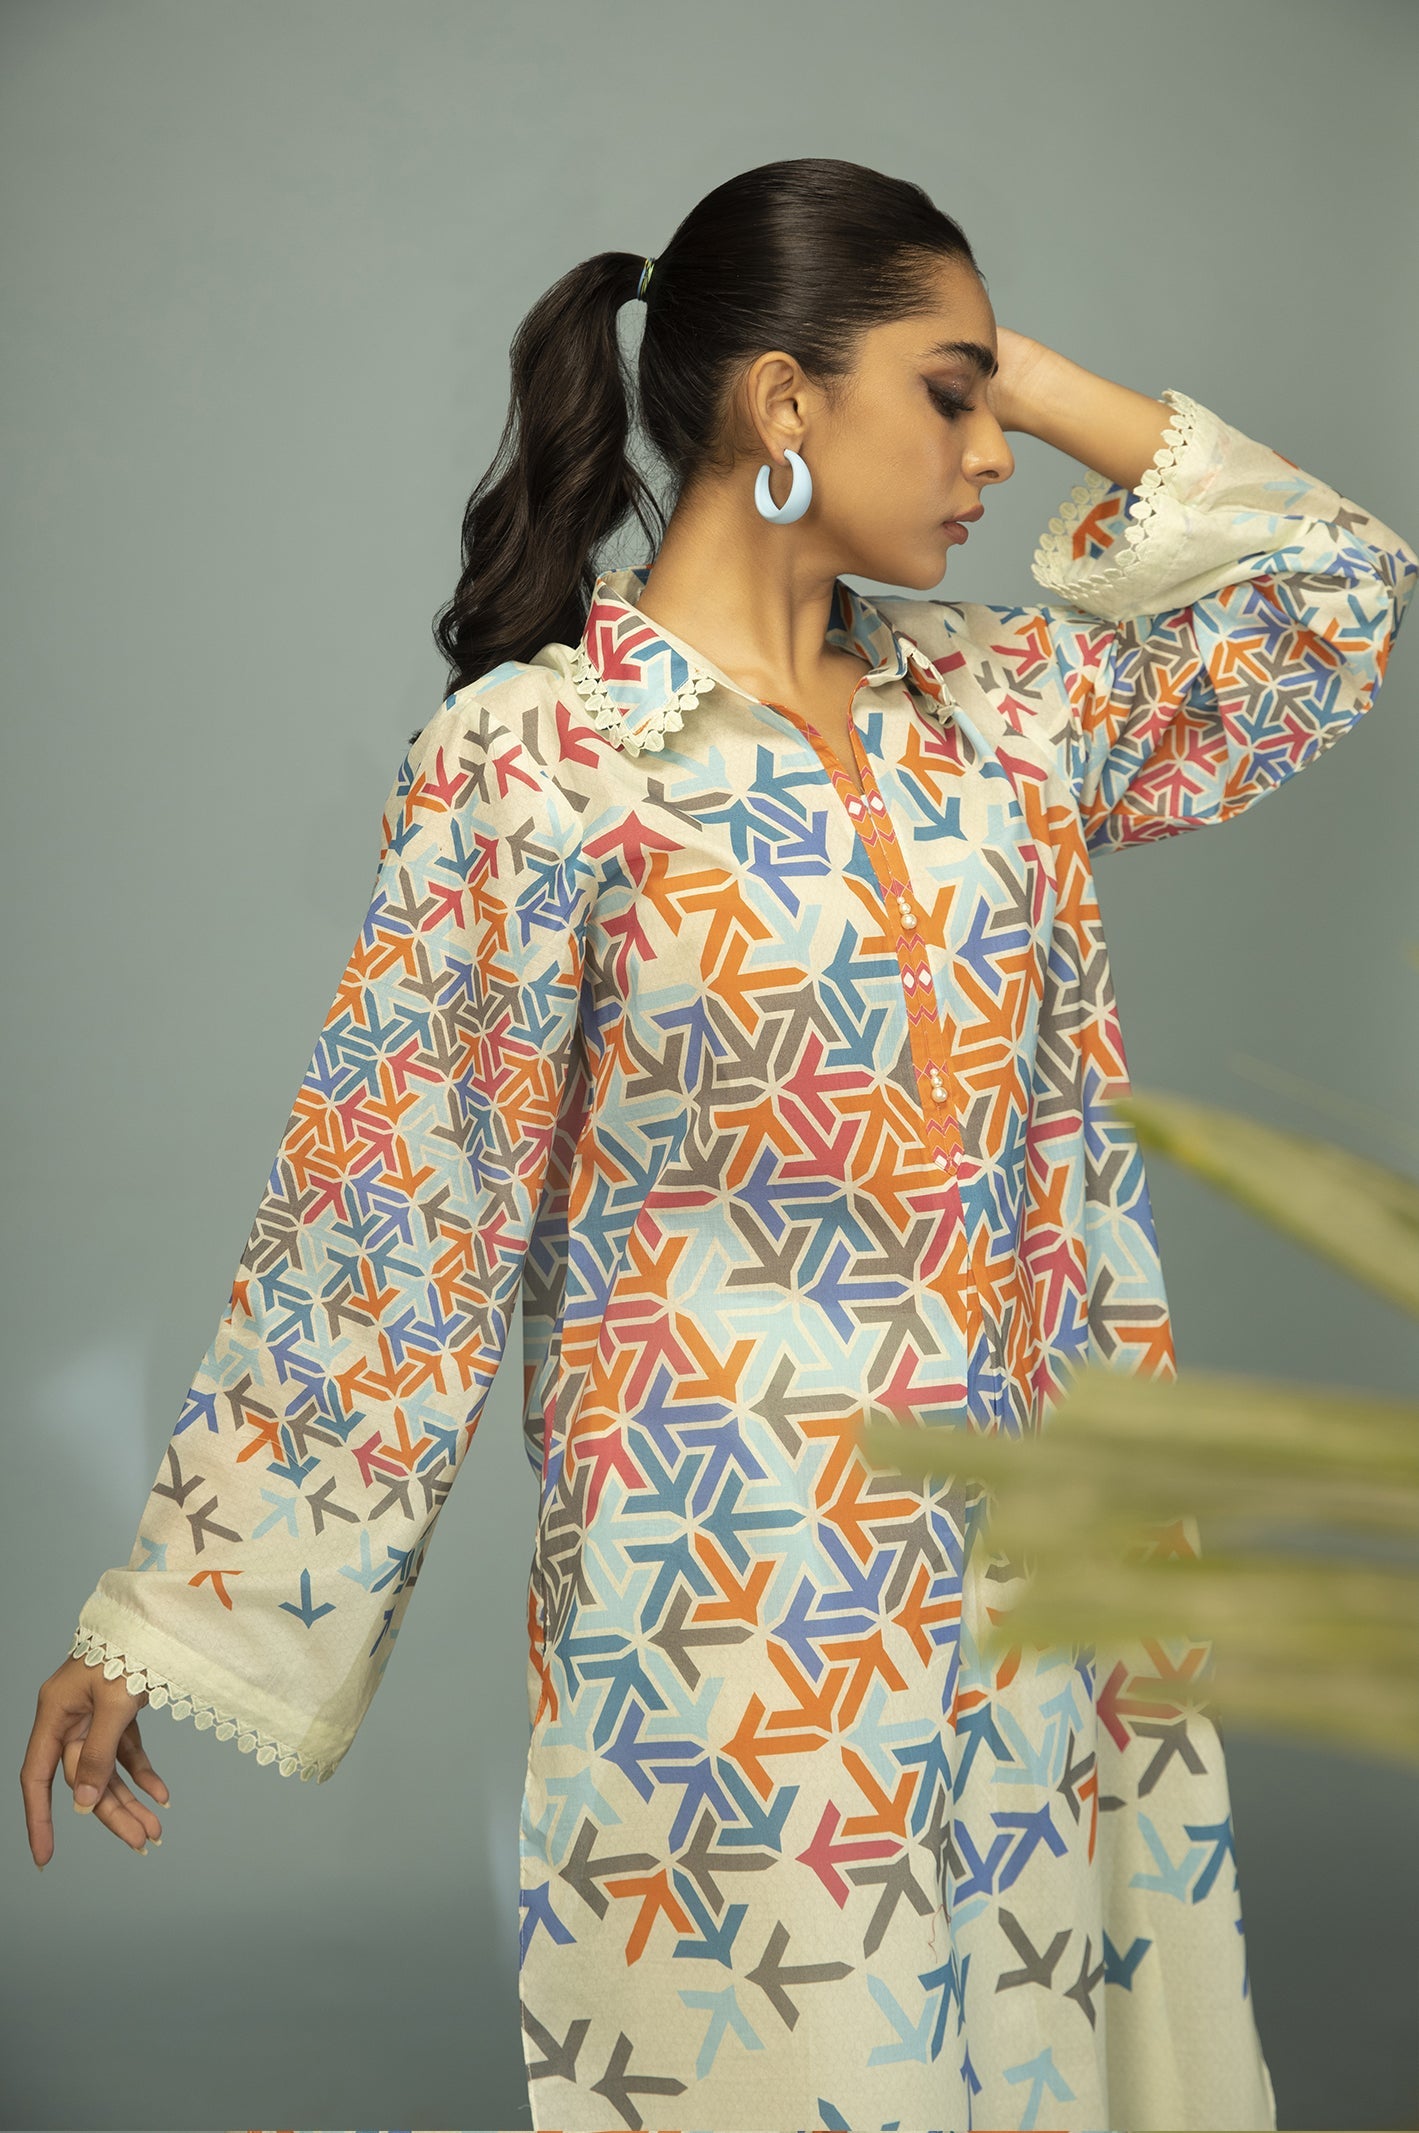 Unstitched 1 Piece Lawn Digital Printed Shirt - Diners